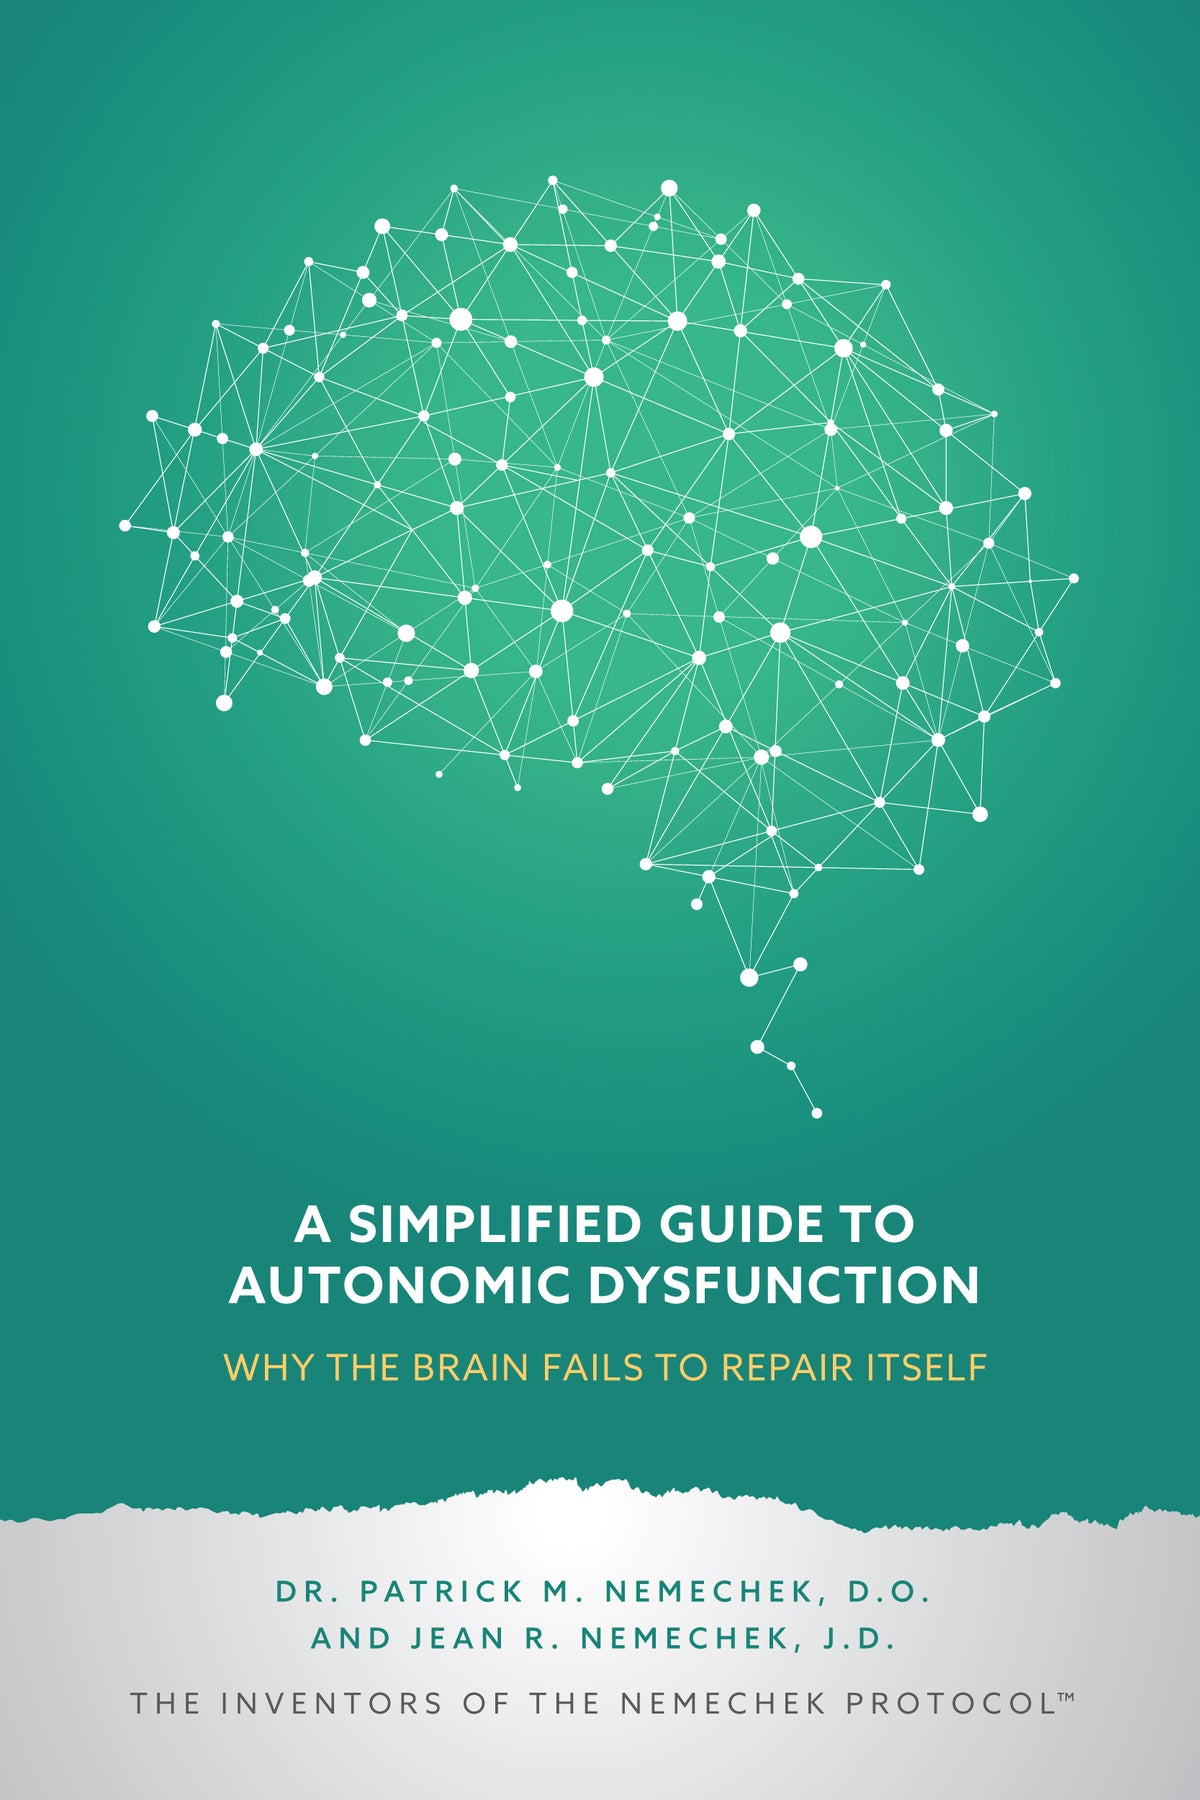 A Simplified Guide to Autonomic Dysfunction - Why the Brain Fails to Repair Itself (Apple)